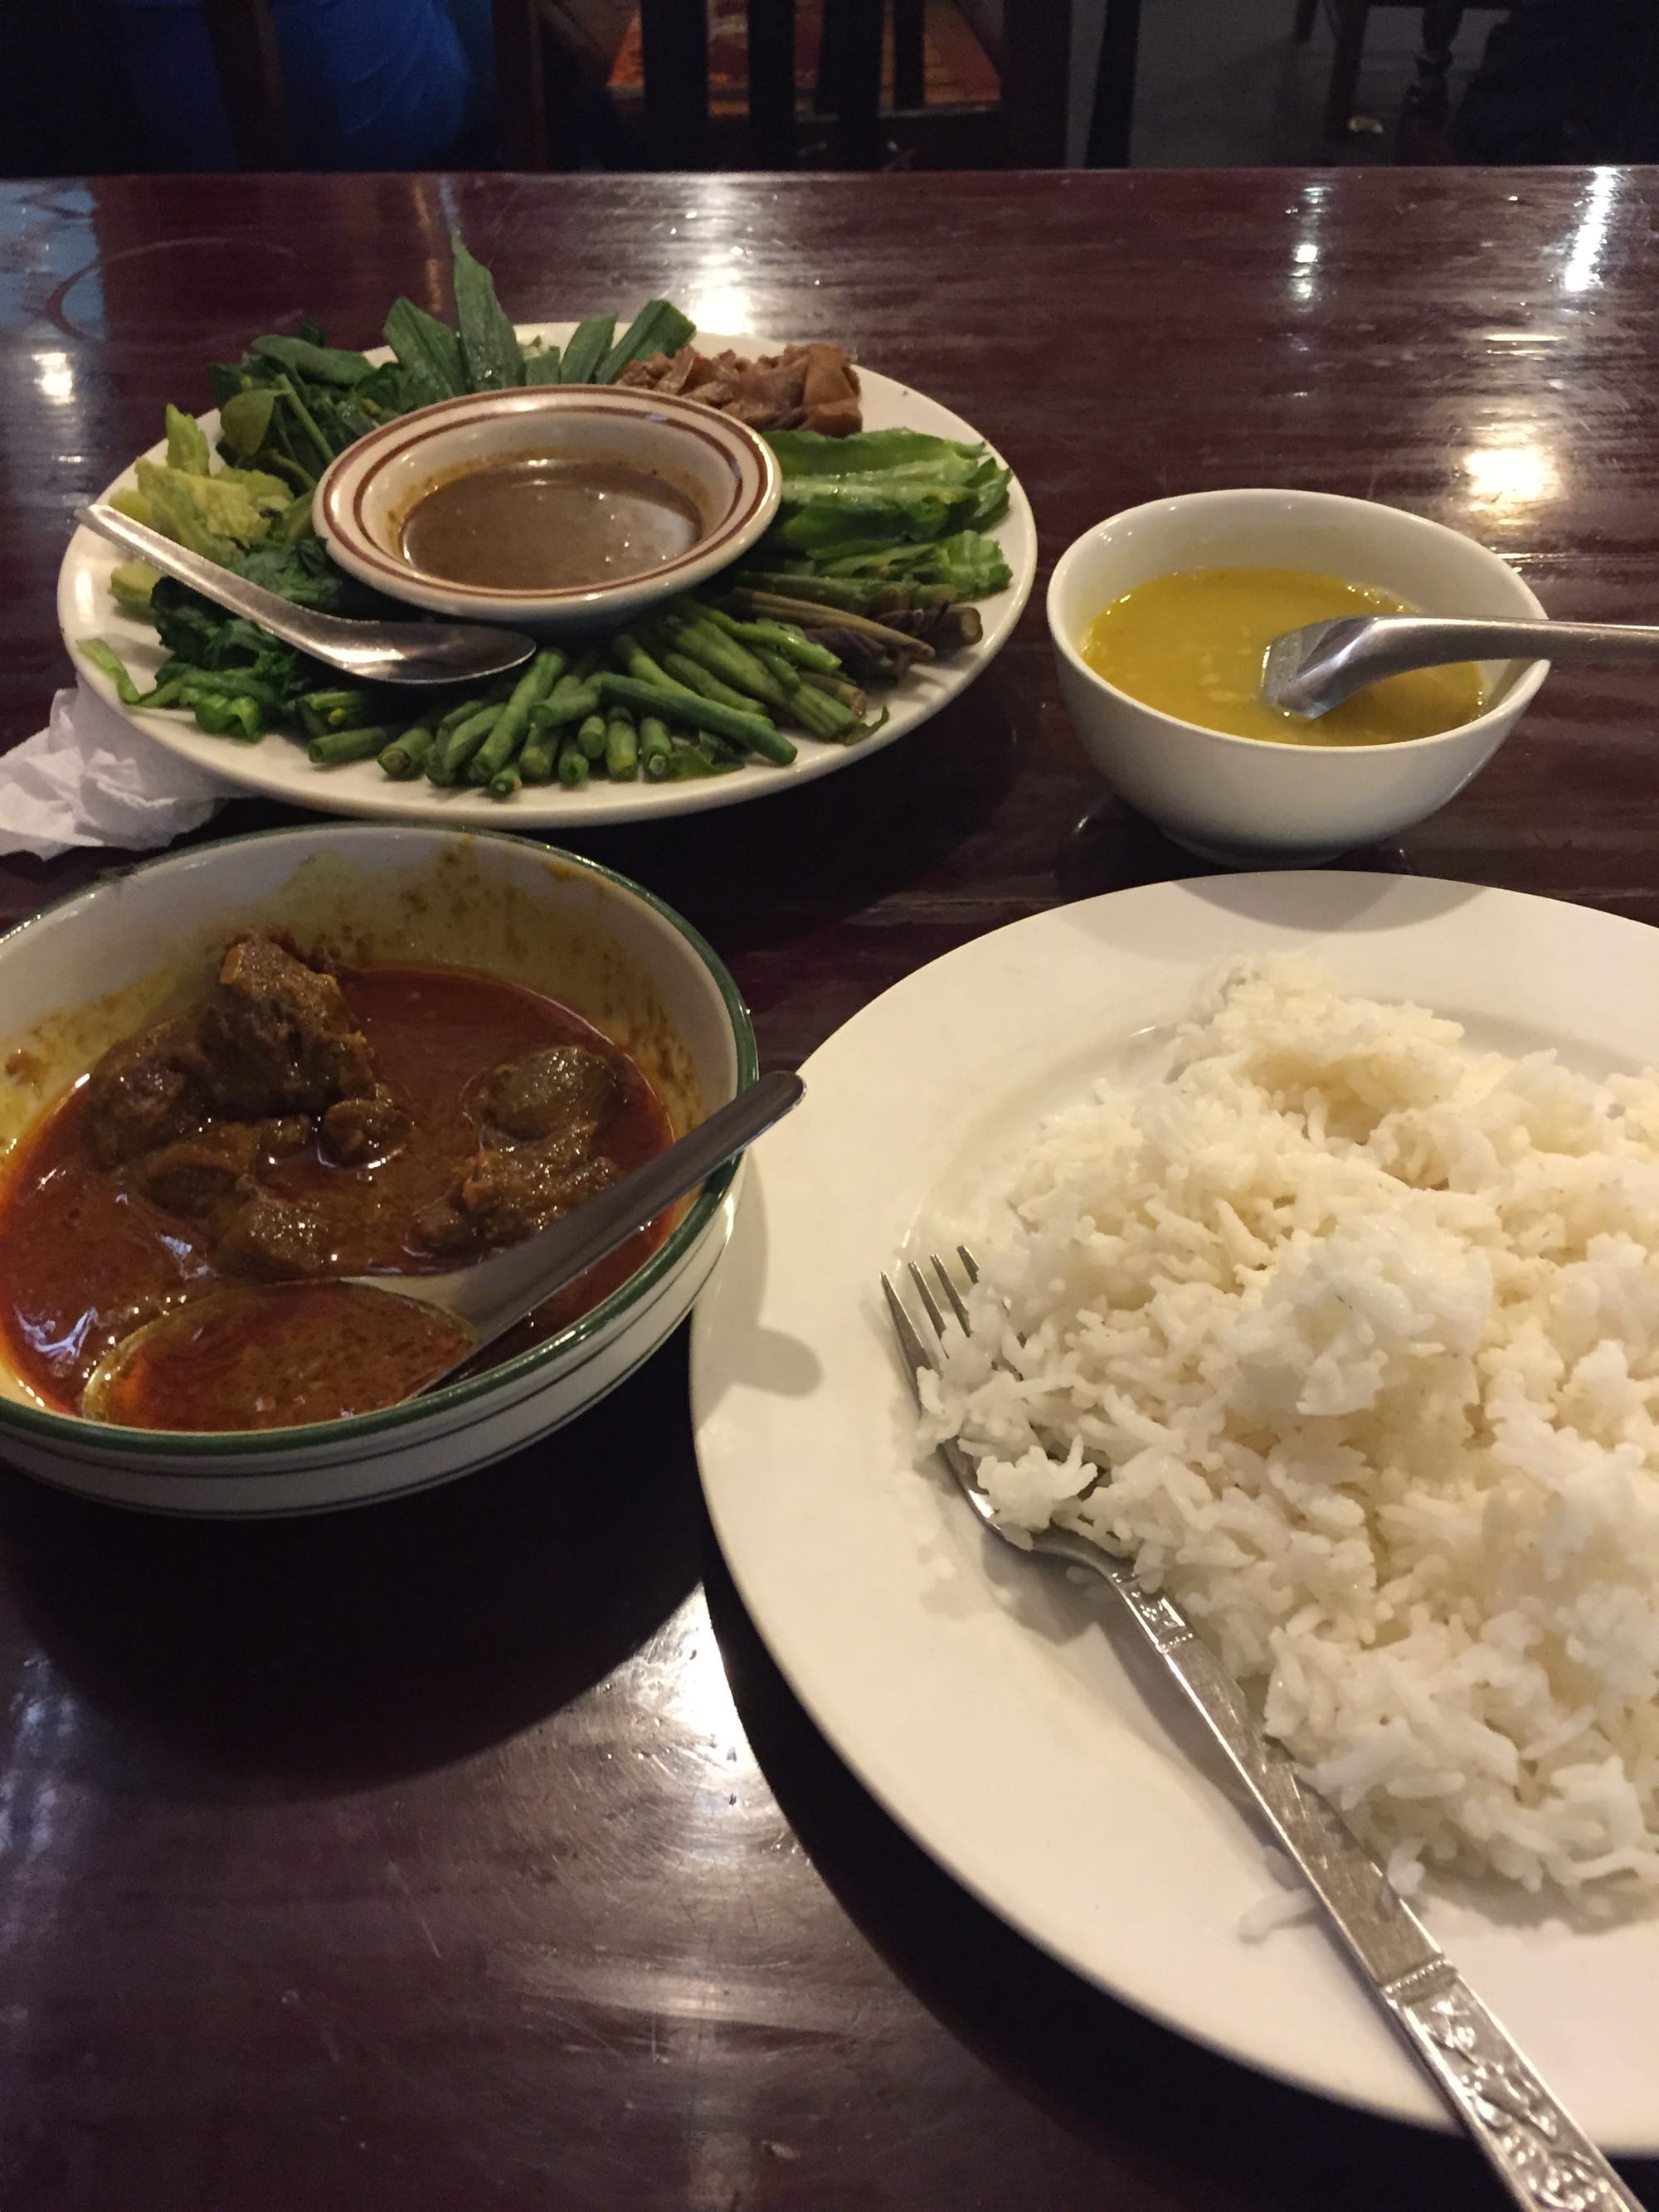 Photo by Author — The complete meal at the Feel Myanmar Food